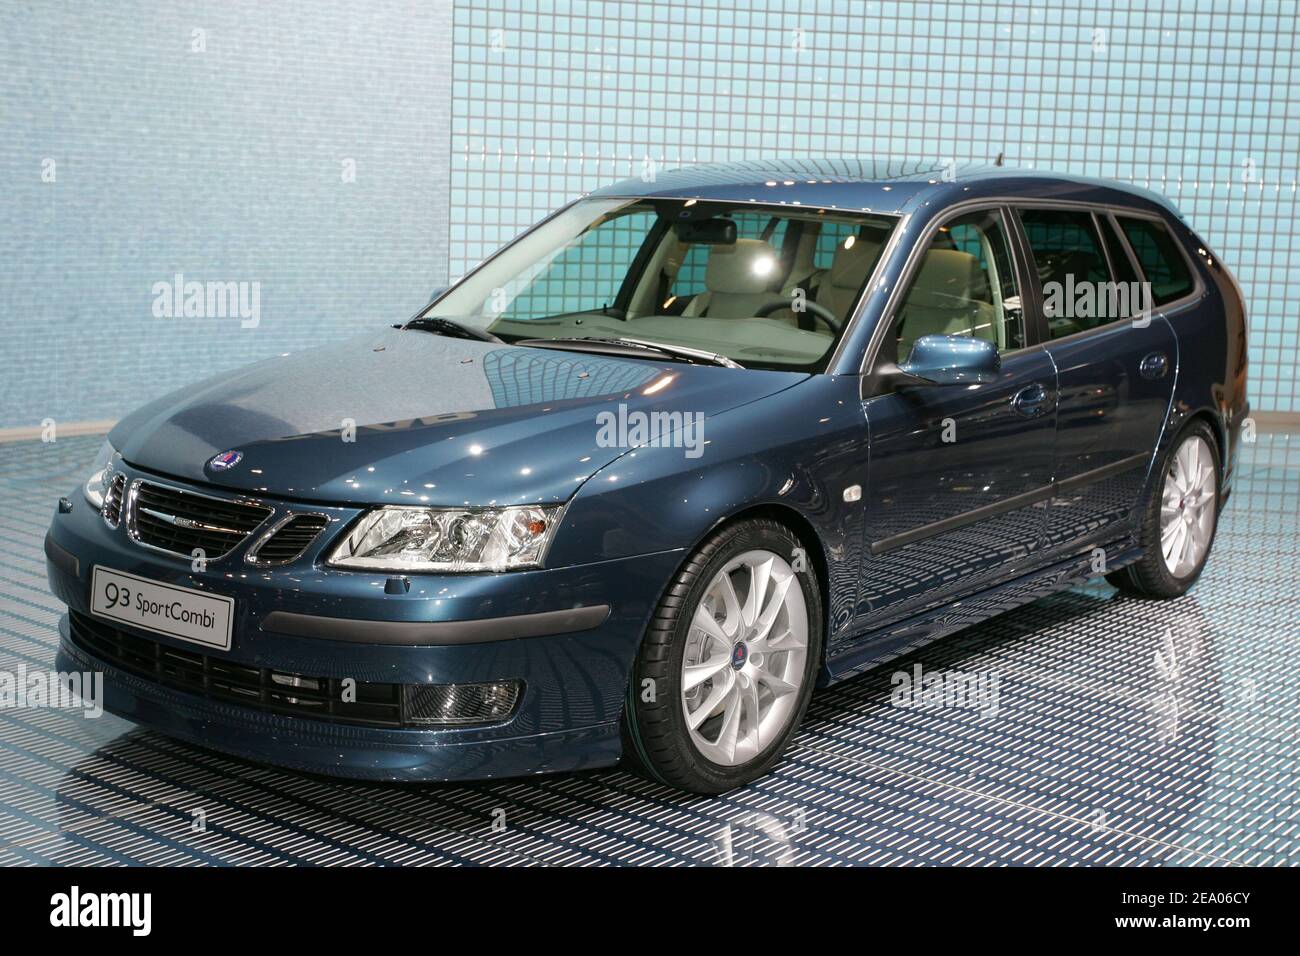 The Saab 9-3 Sport Combi is on display as a first world presentation at the 75th Geneva motor show in Geneva, Switzerland, on March 2, 2005. The new Saab is powered with an all-new turbocharged V6 engine that makes 250 hp. Photo by Laurent Zabulon/ABACA. Stock Photo